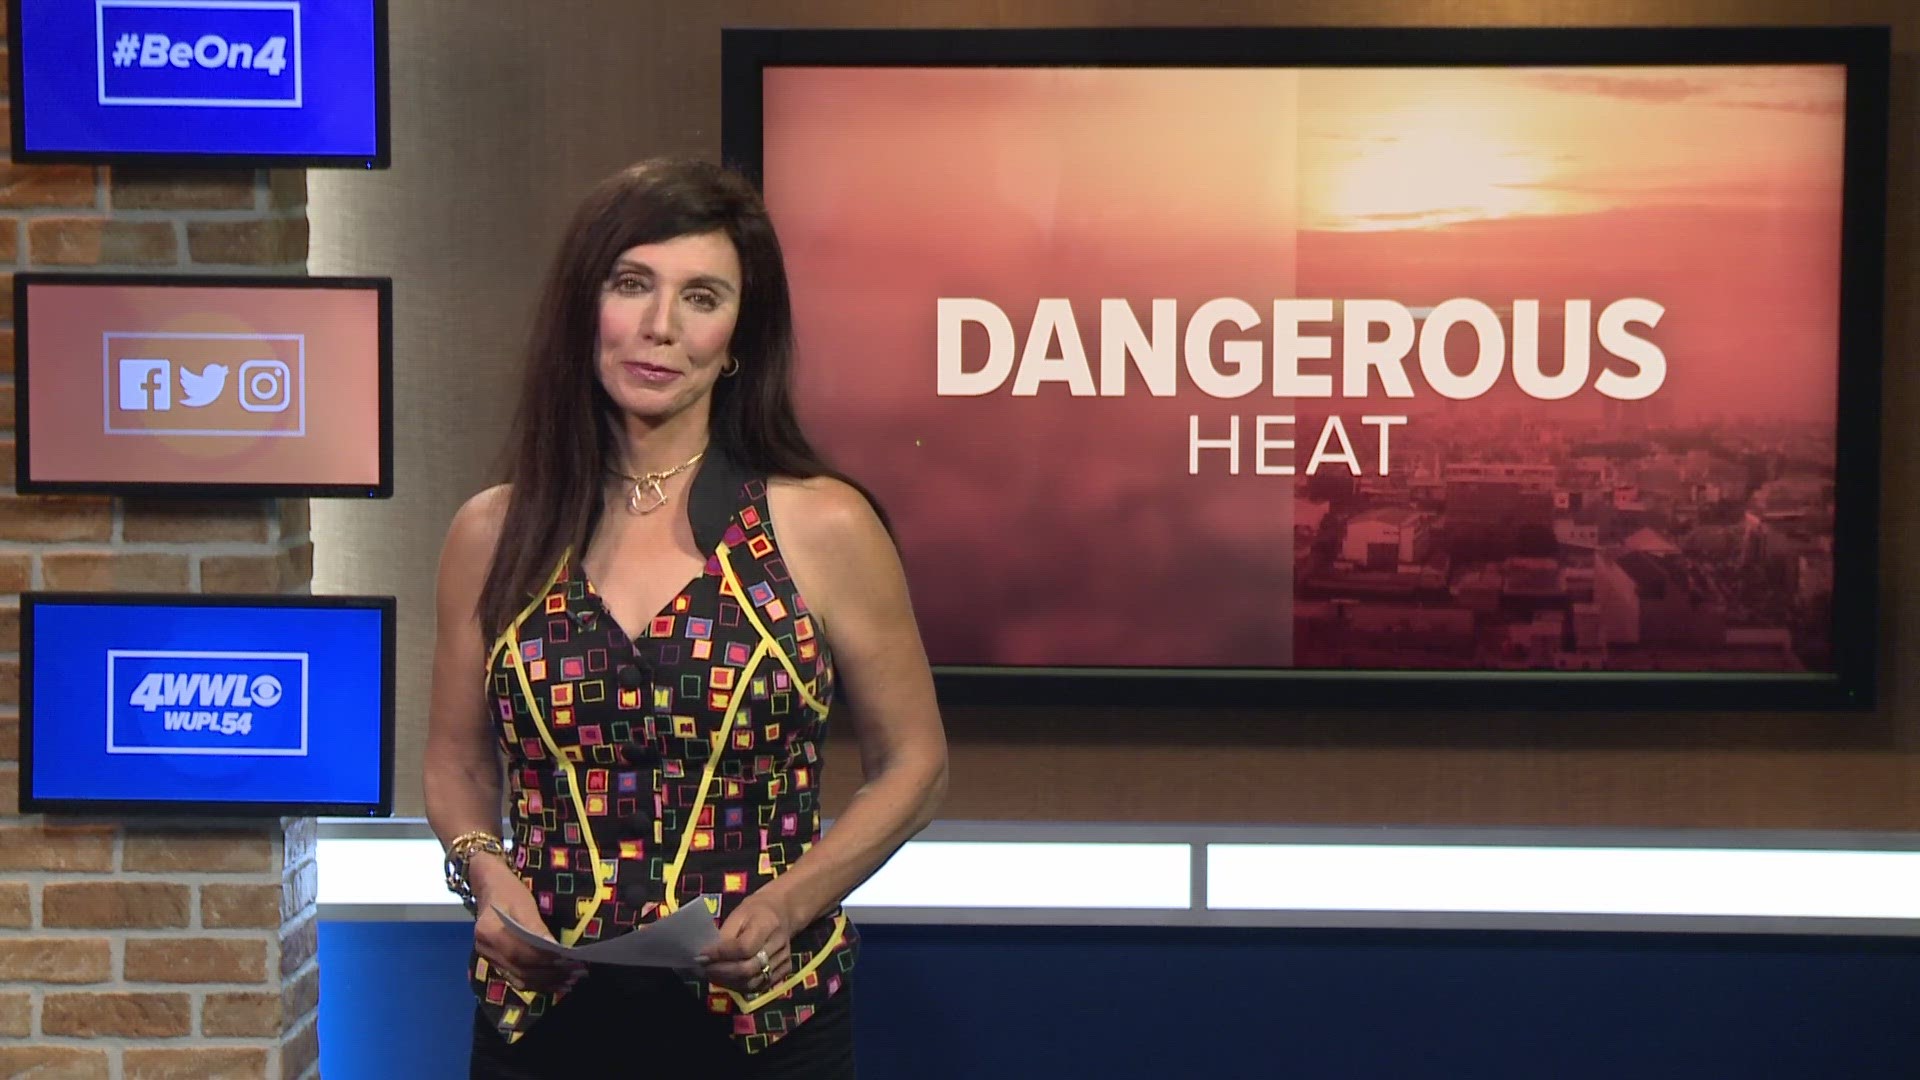 Some of the medications you take could cause problems in the extreme heat. Doctors caution not to stop taking your meds, just be careful with the heat.